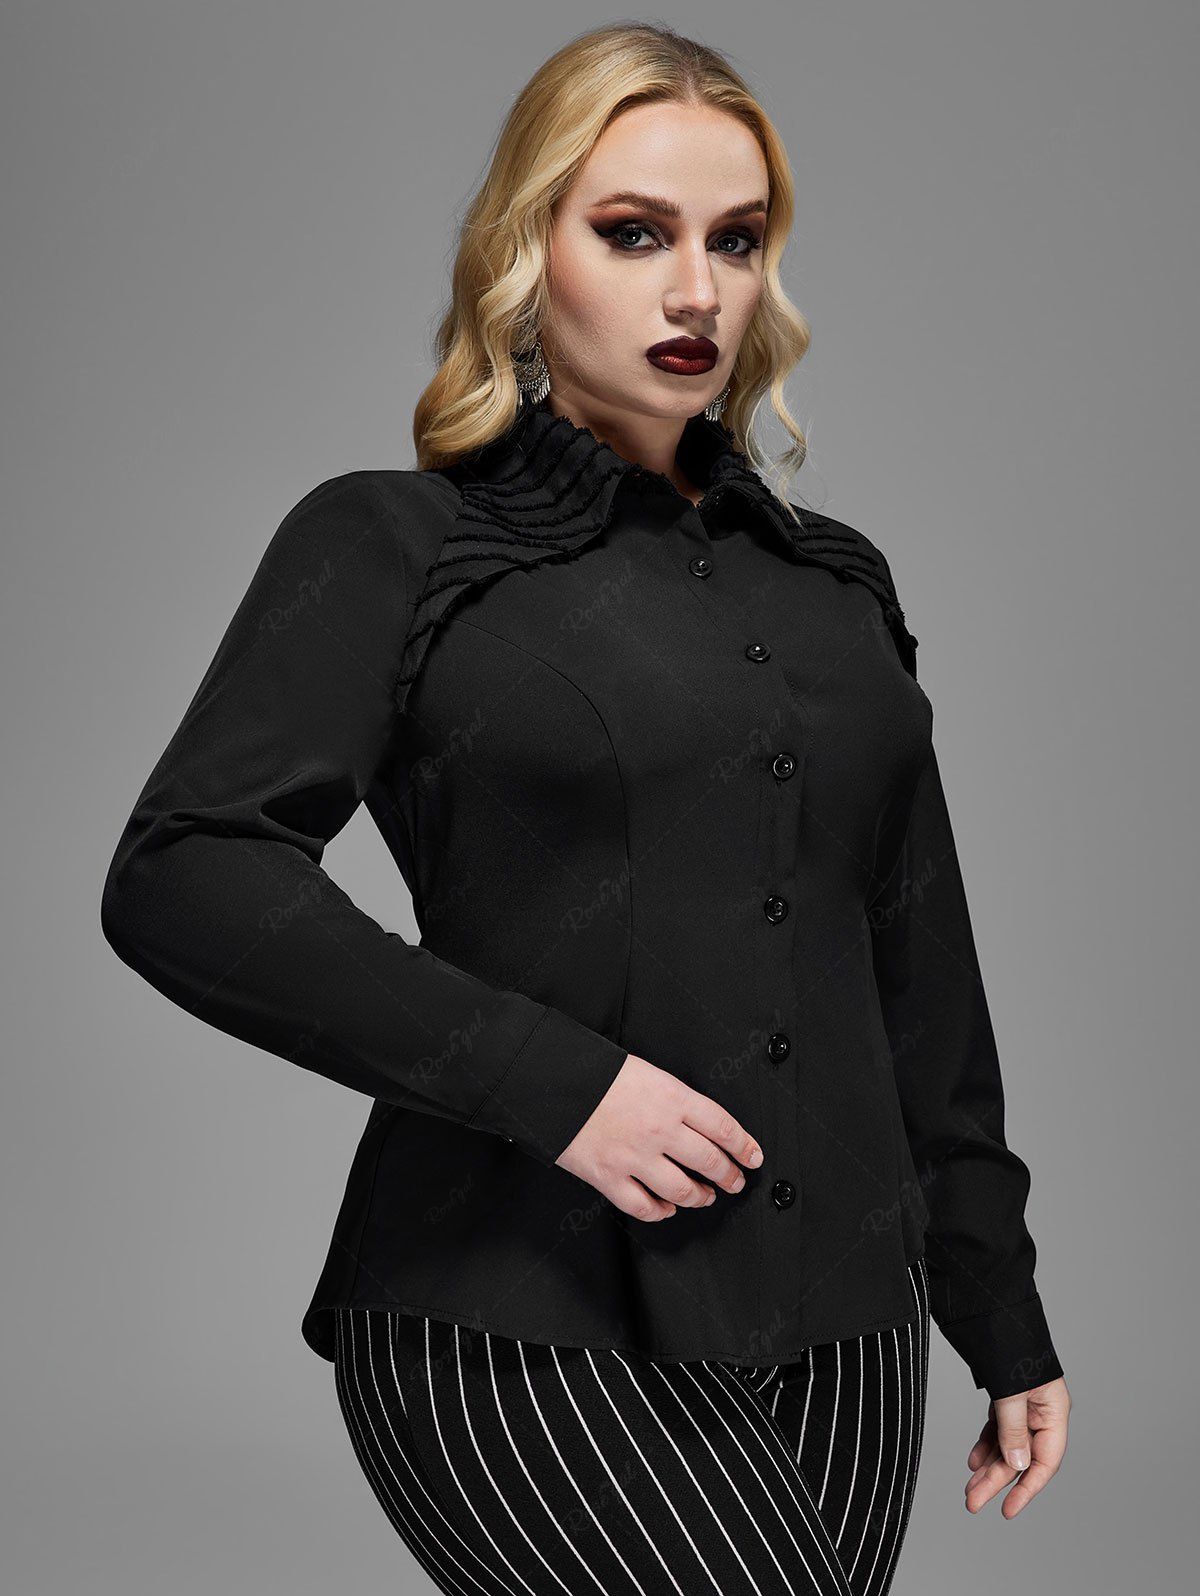 Gothic Asymmetric Flat Collar Solid Buttons Long Sleeves Shirt